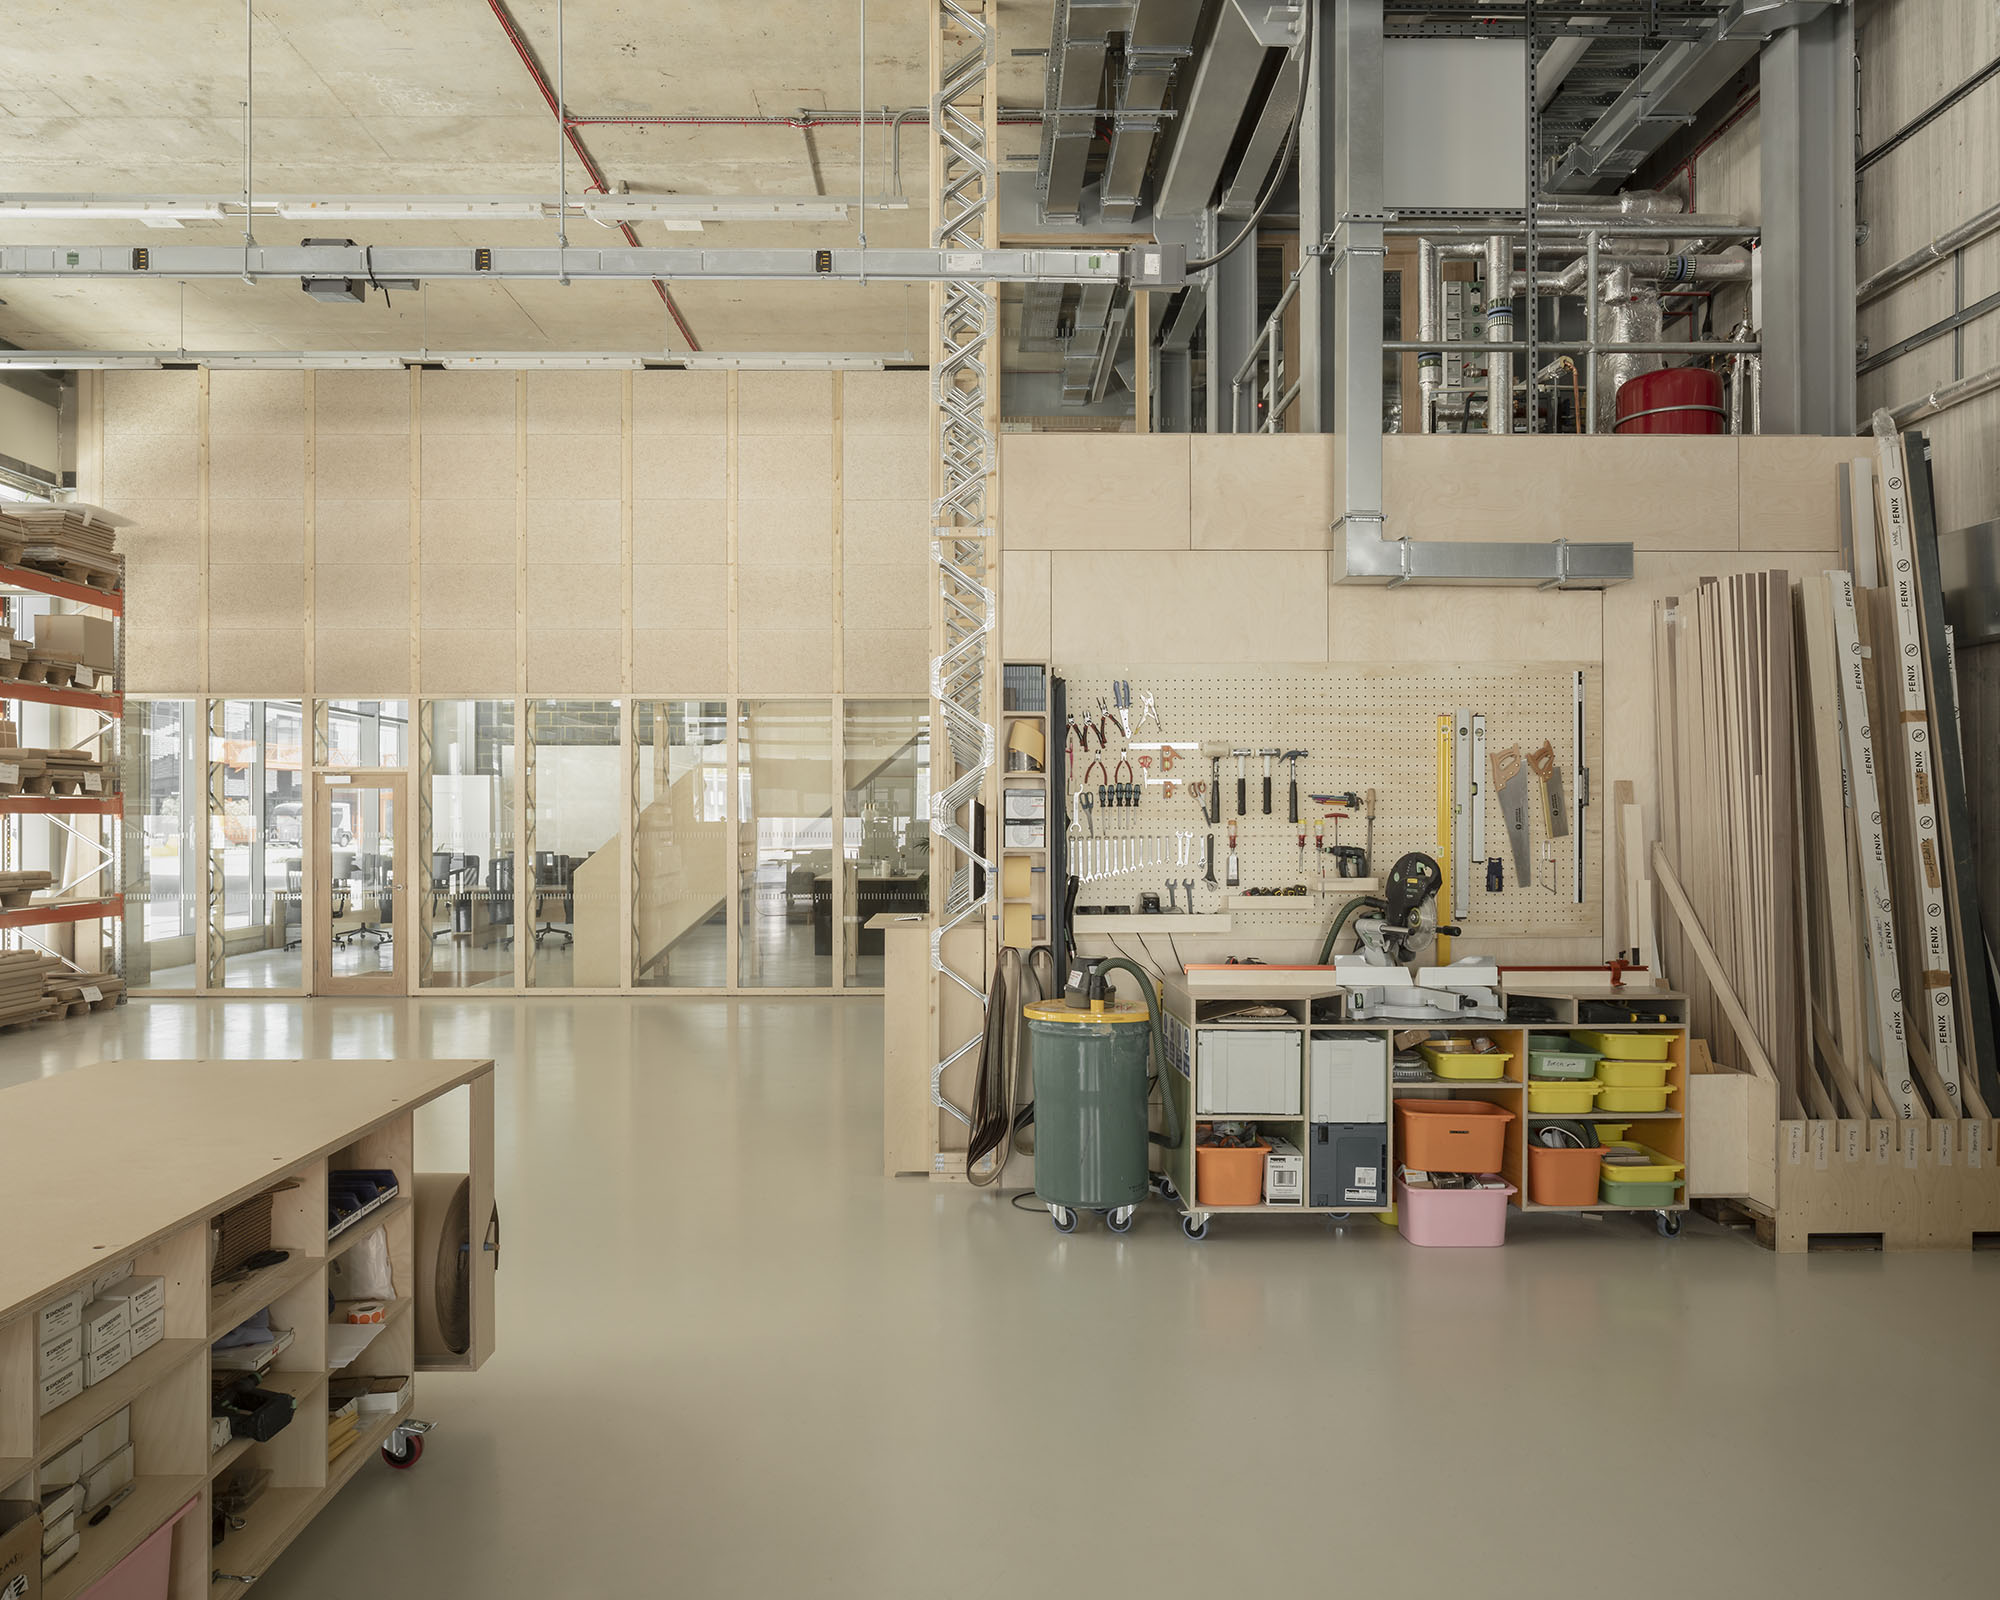 Erbar Mattes Architects Here East Stratford Hackney Plykea workshop showroom office refurbishment retrofit interior fit out timber studwork open web joists wood wool boards